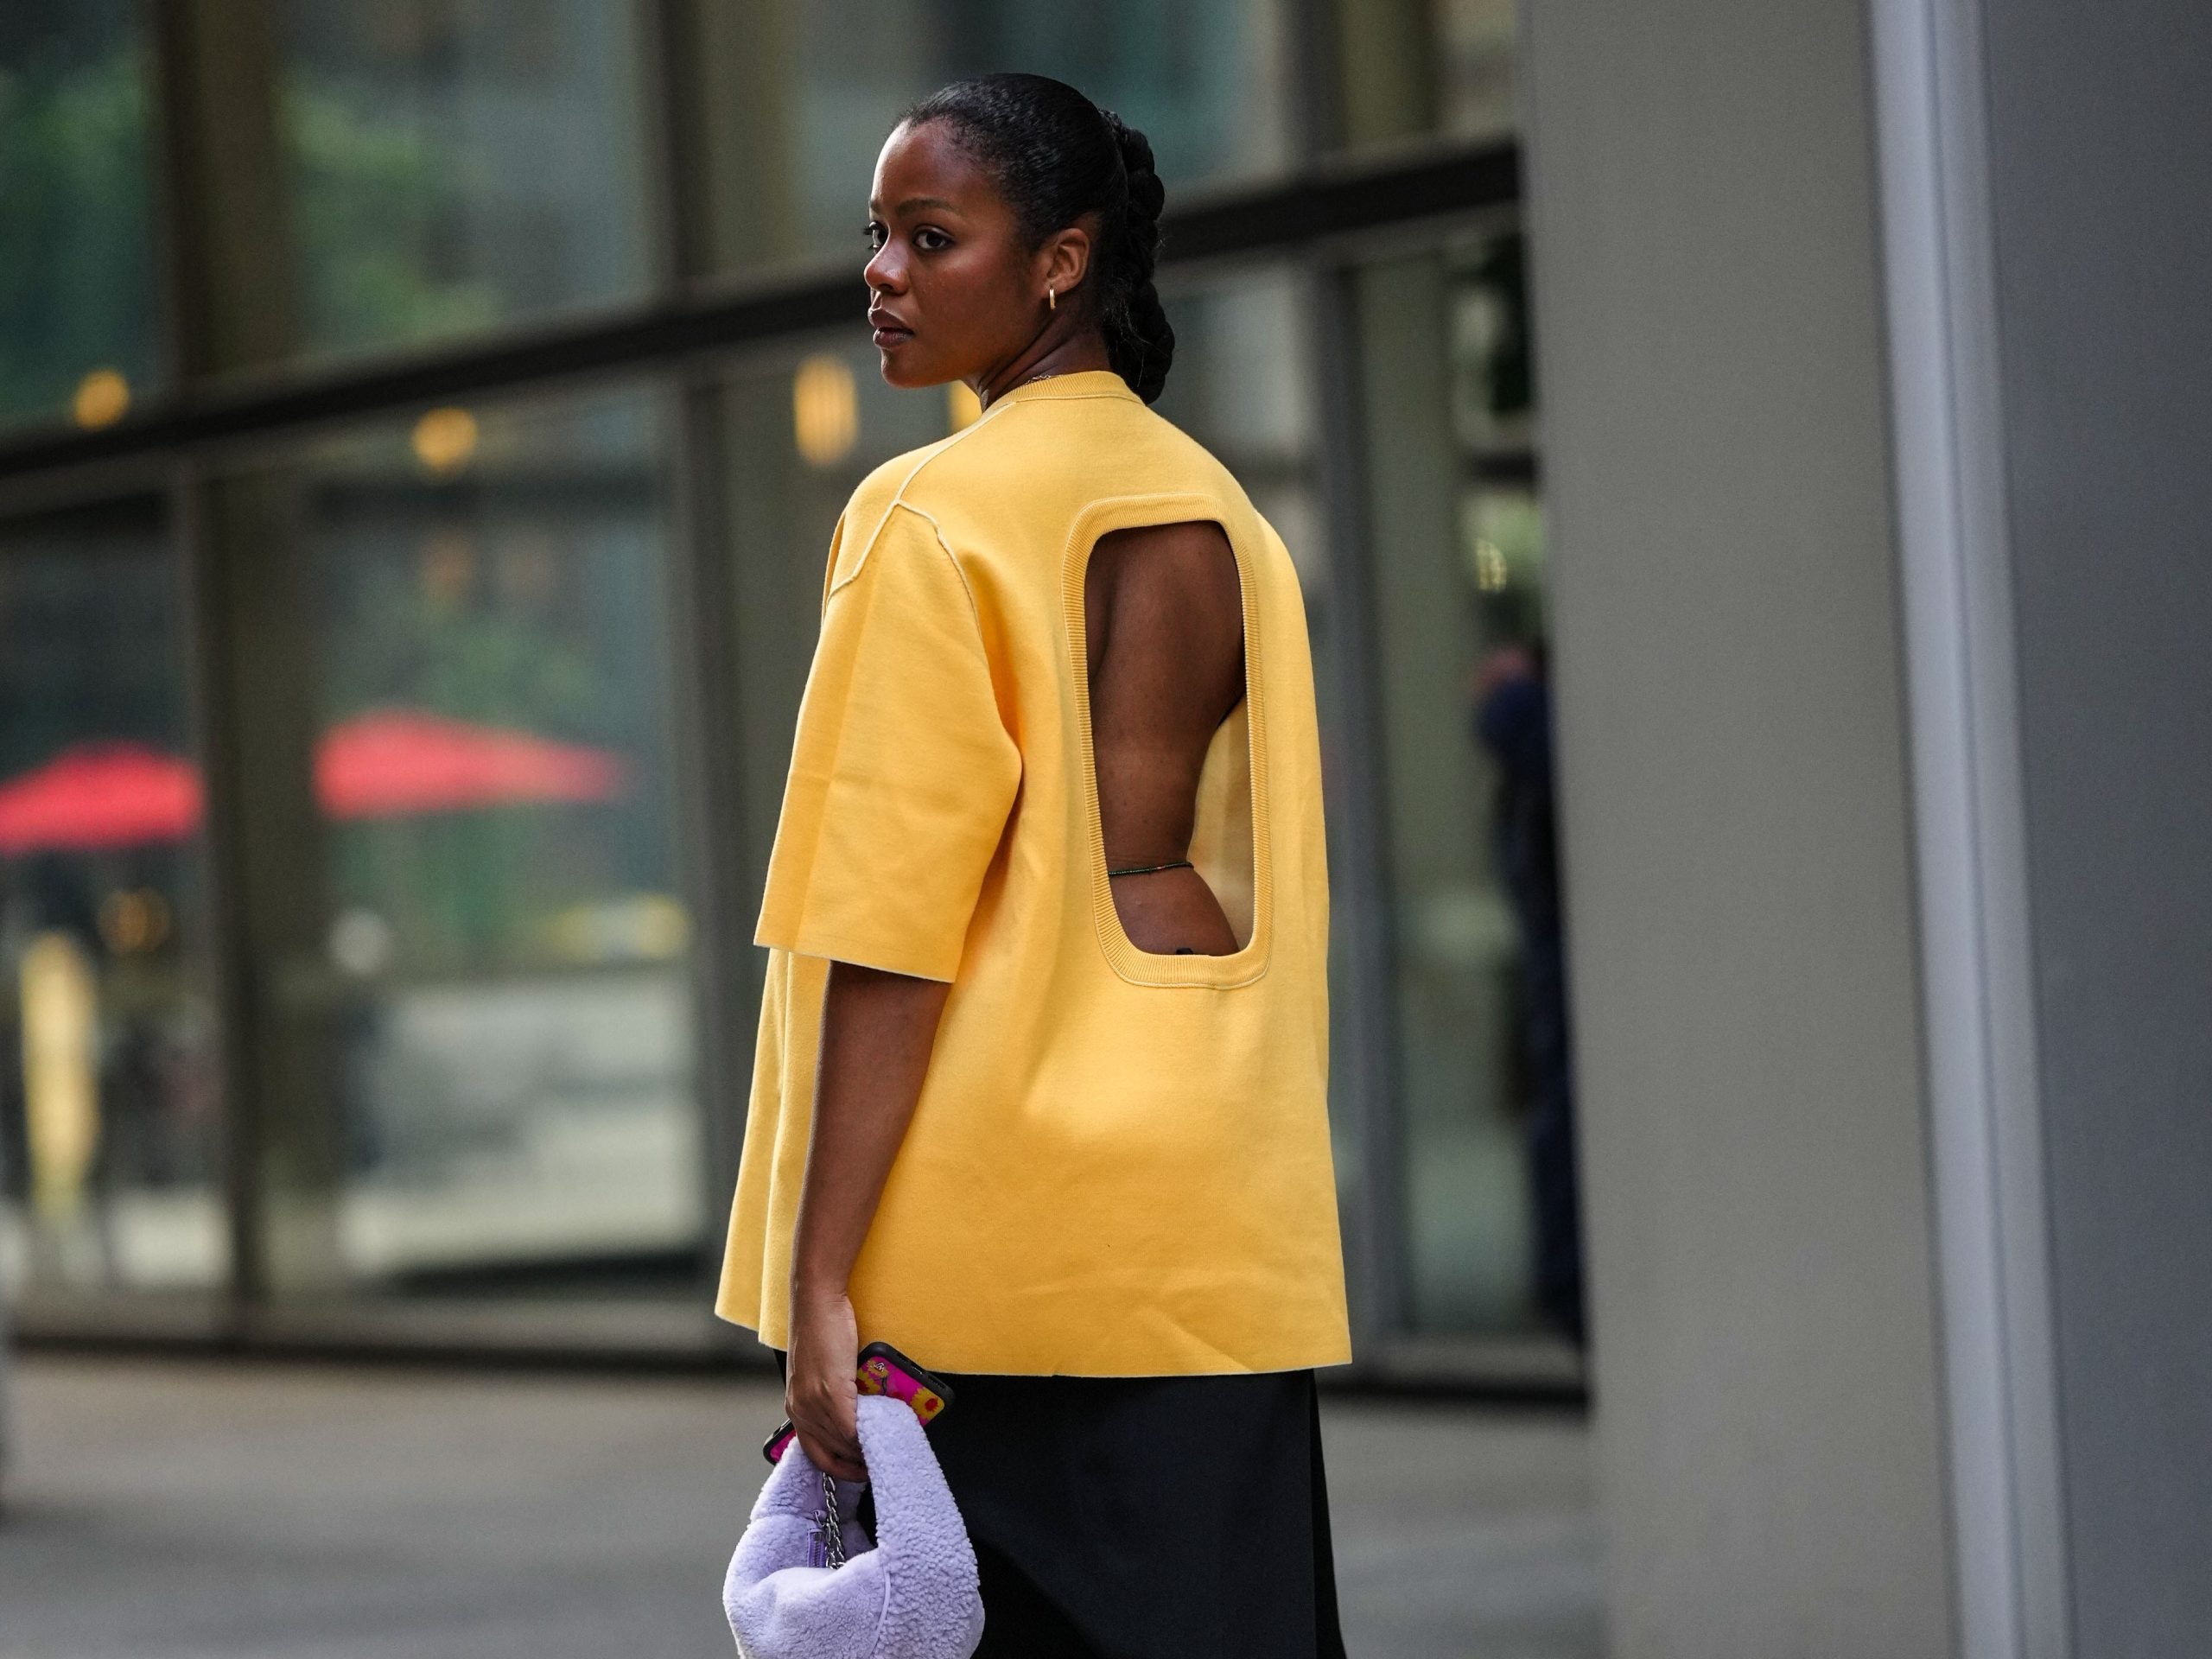 Backless Tops Are Trending, Here's How To Wear Them